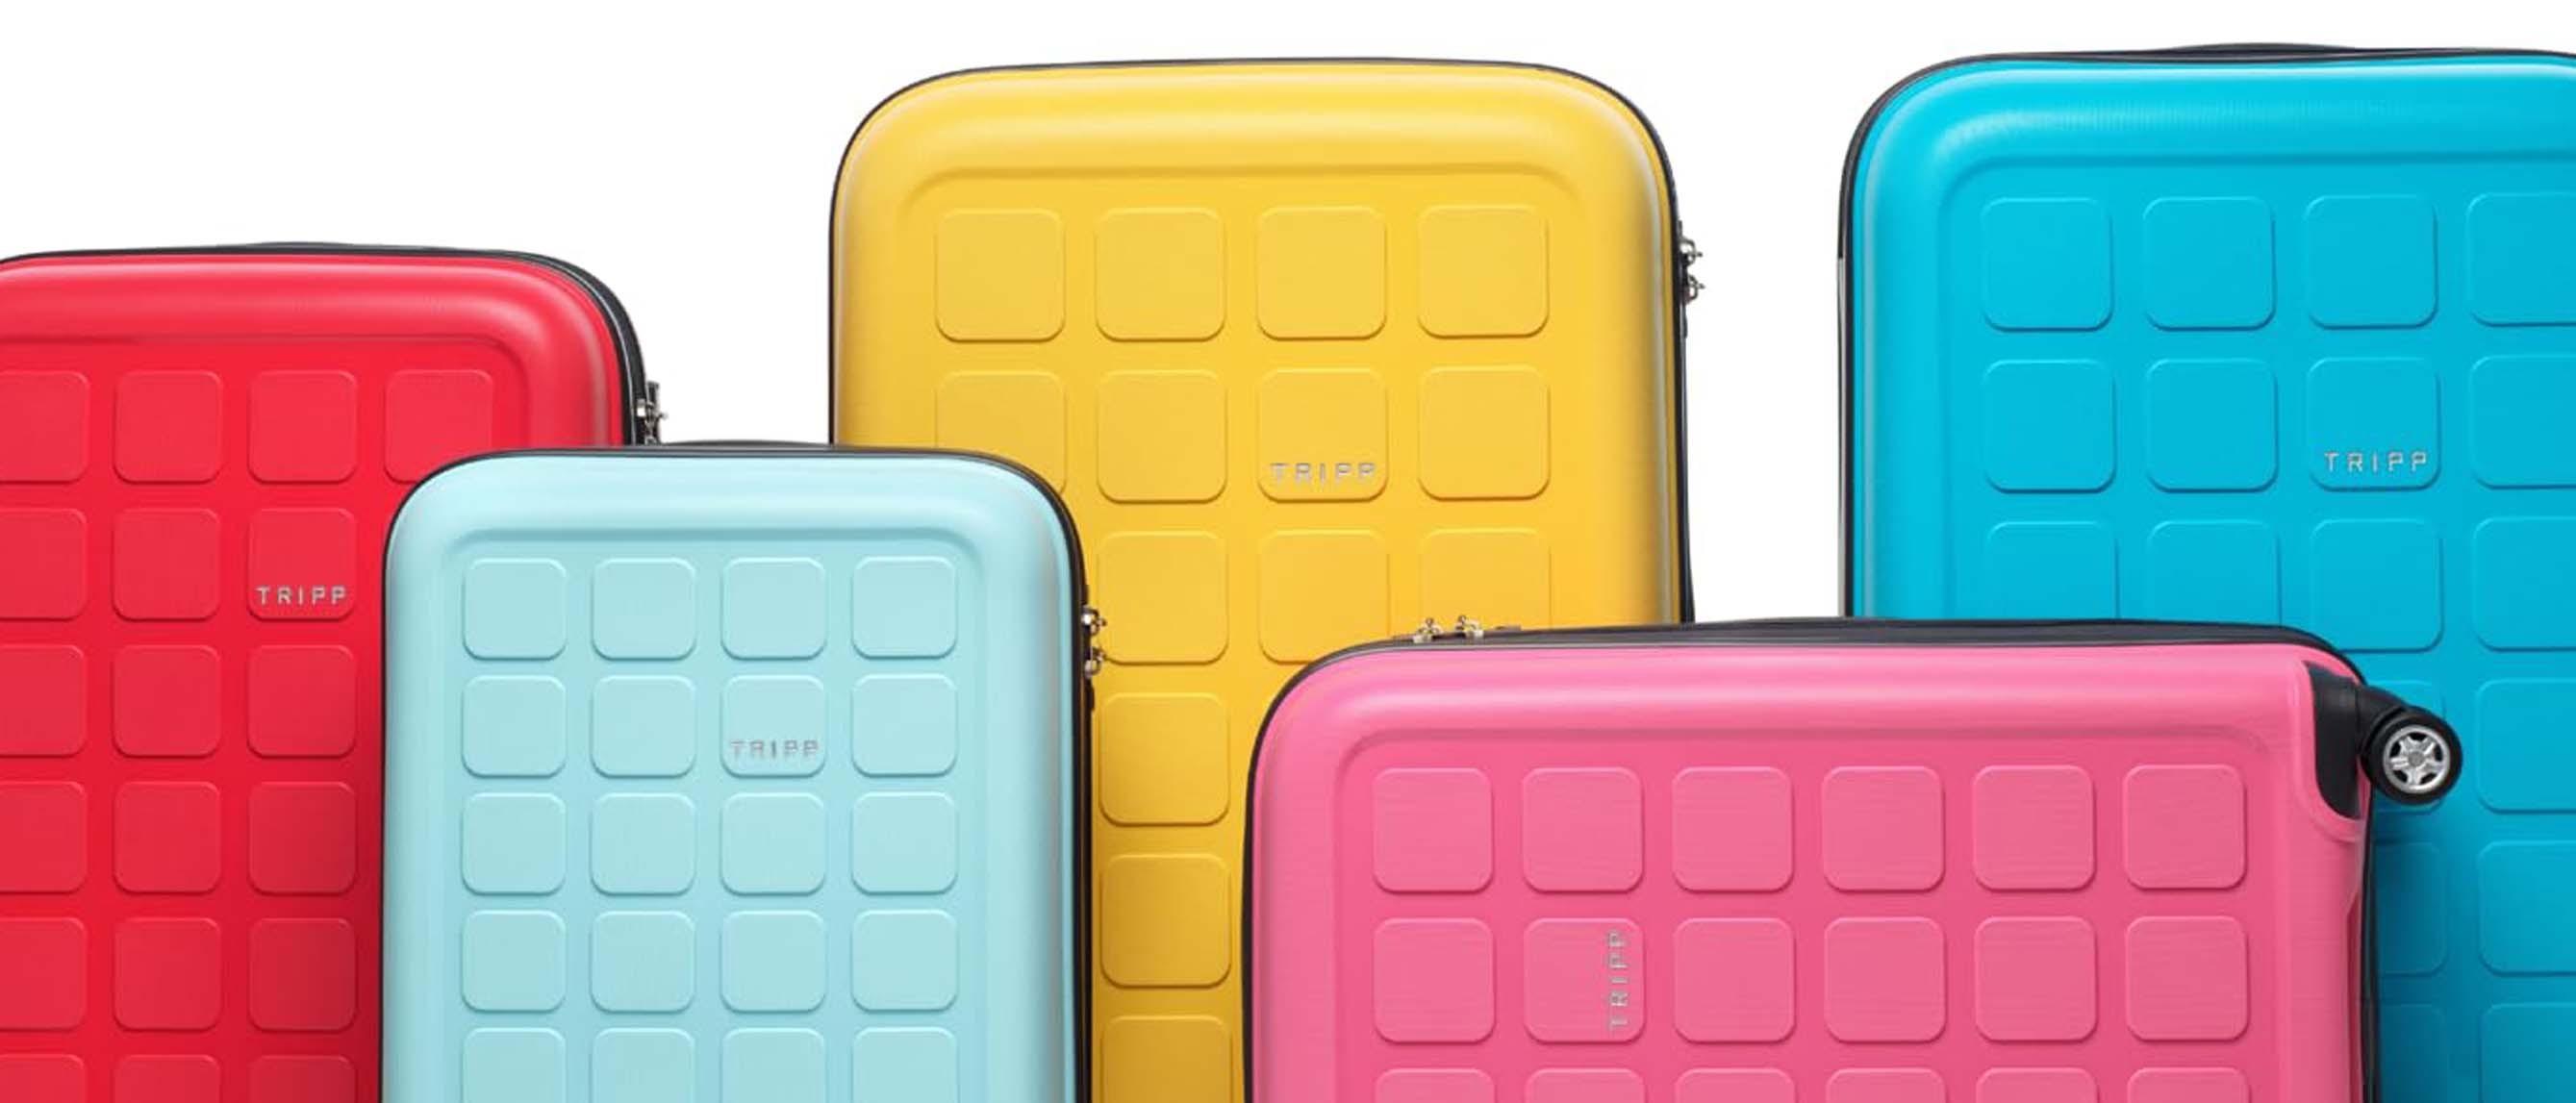 Which Tripp suitcase range is best? We review the top 3 choices